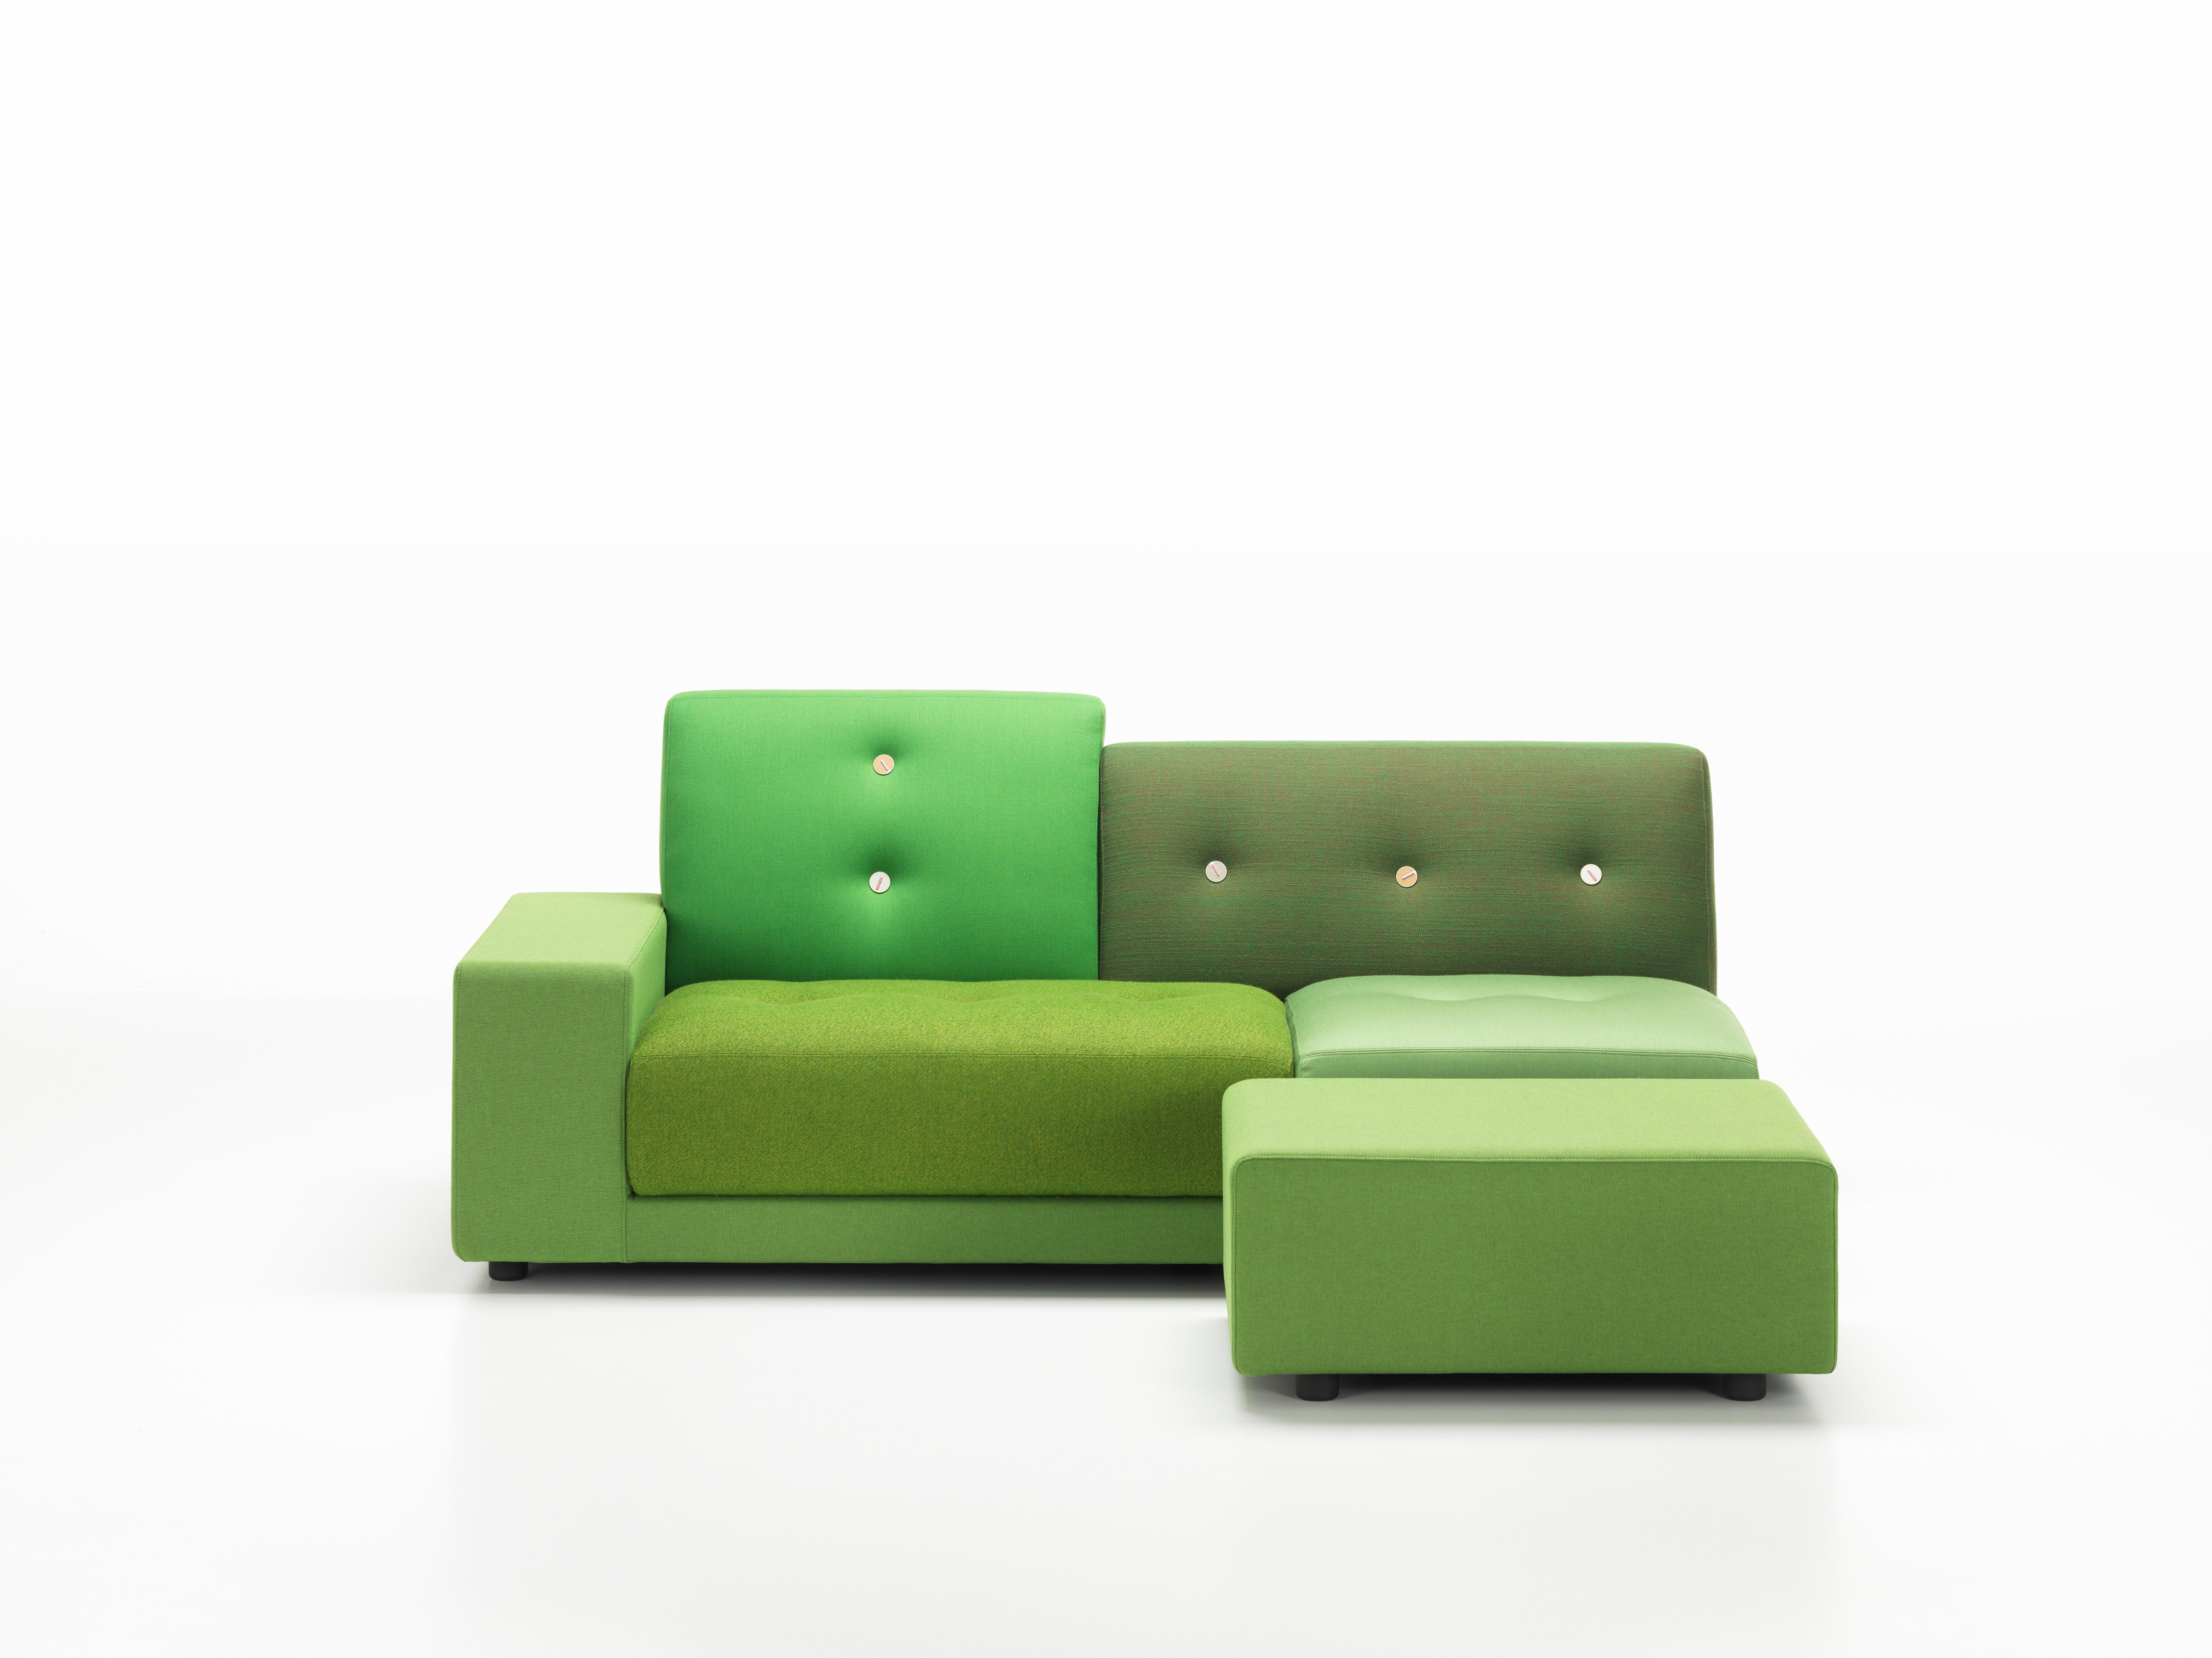 Vitra Polder Sofa in Green Shades by Hella Jongerius In New Condition For Sale In New York, NY